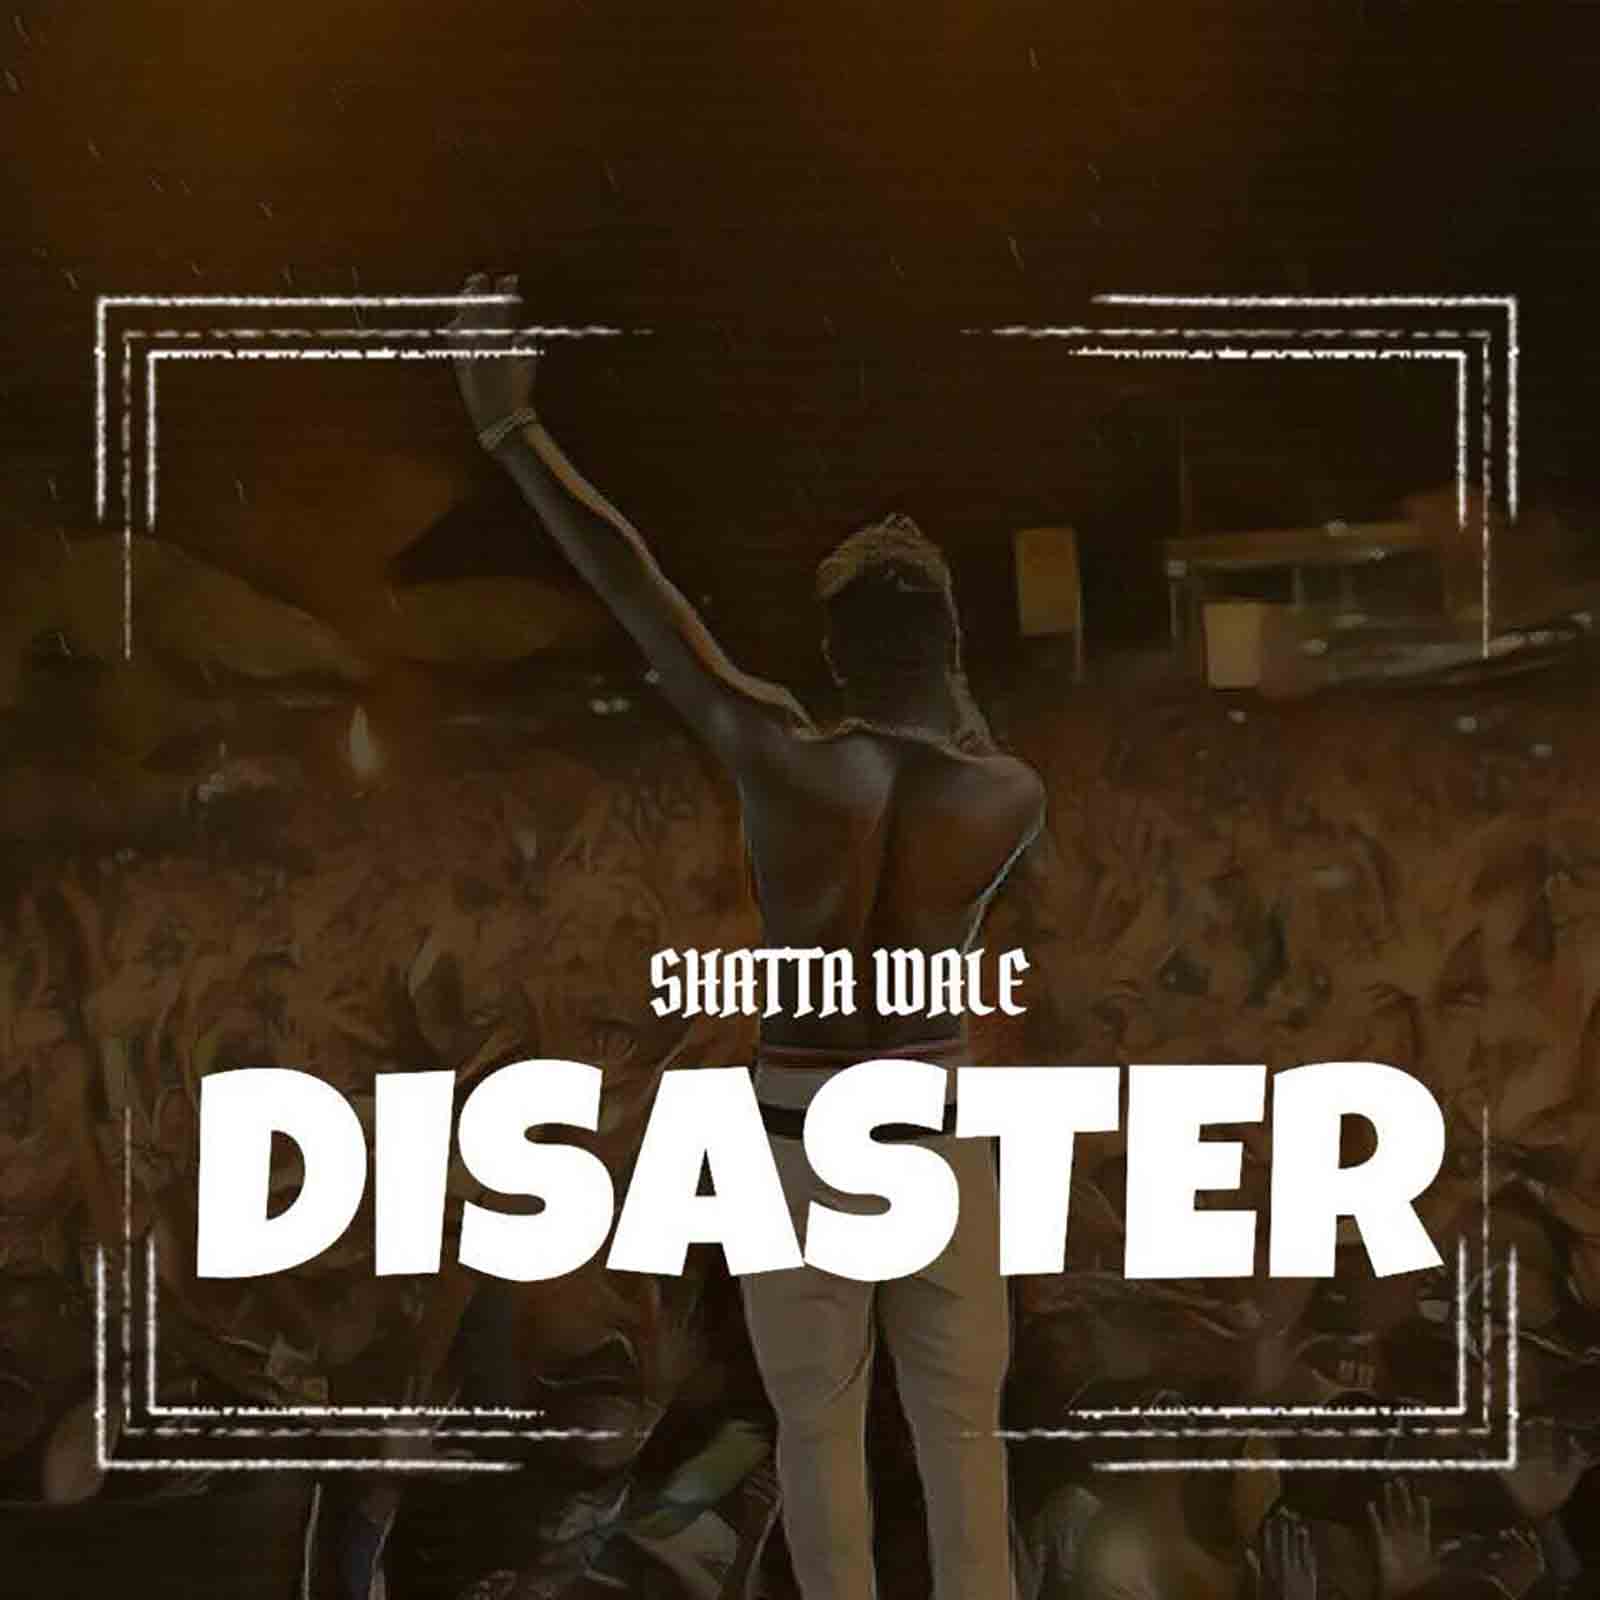 Disaster by Shatta Wale